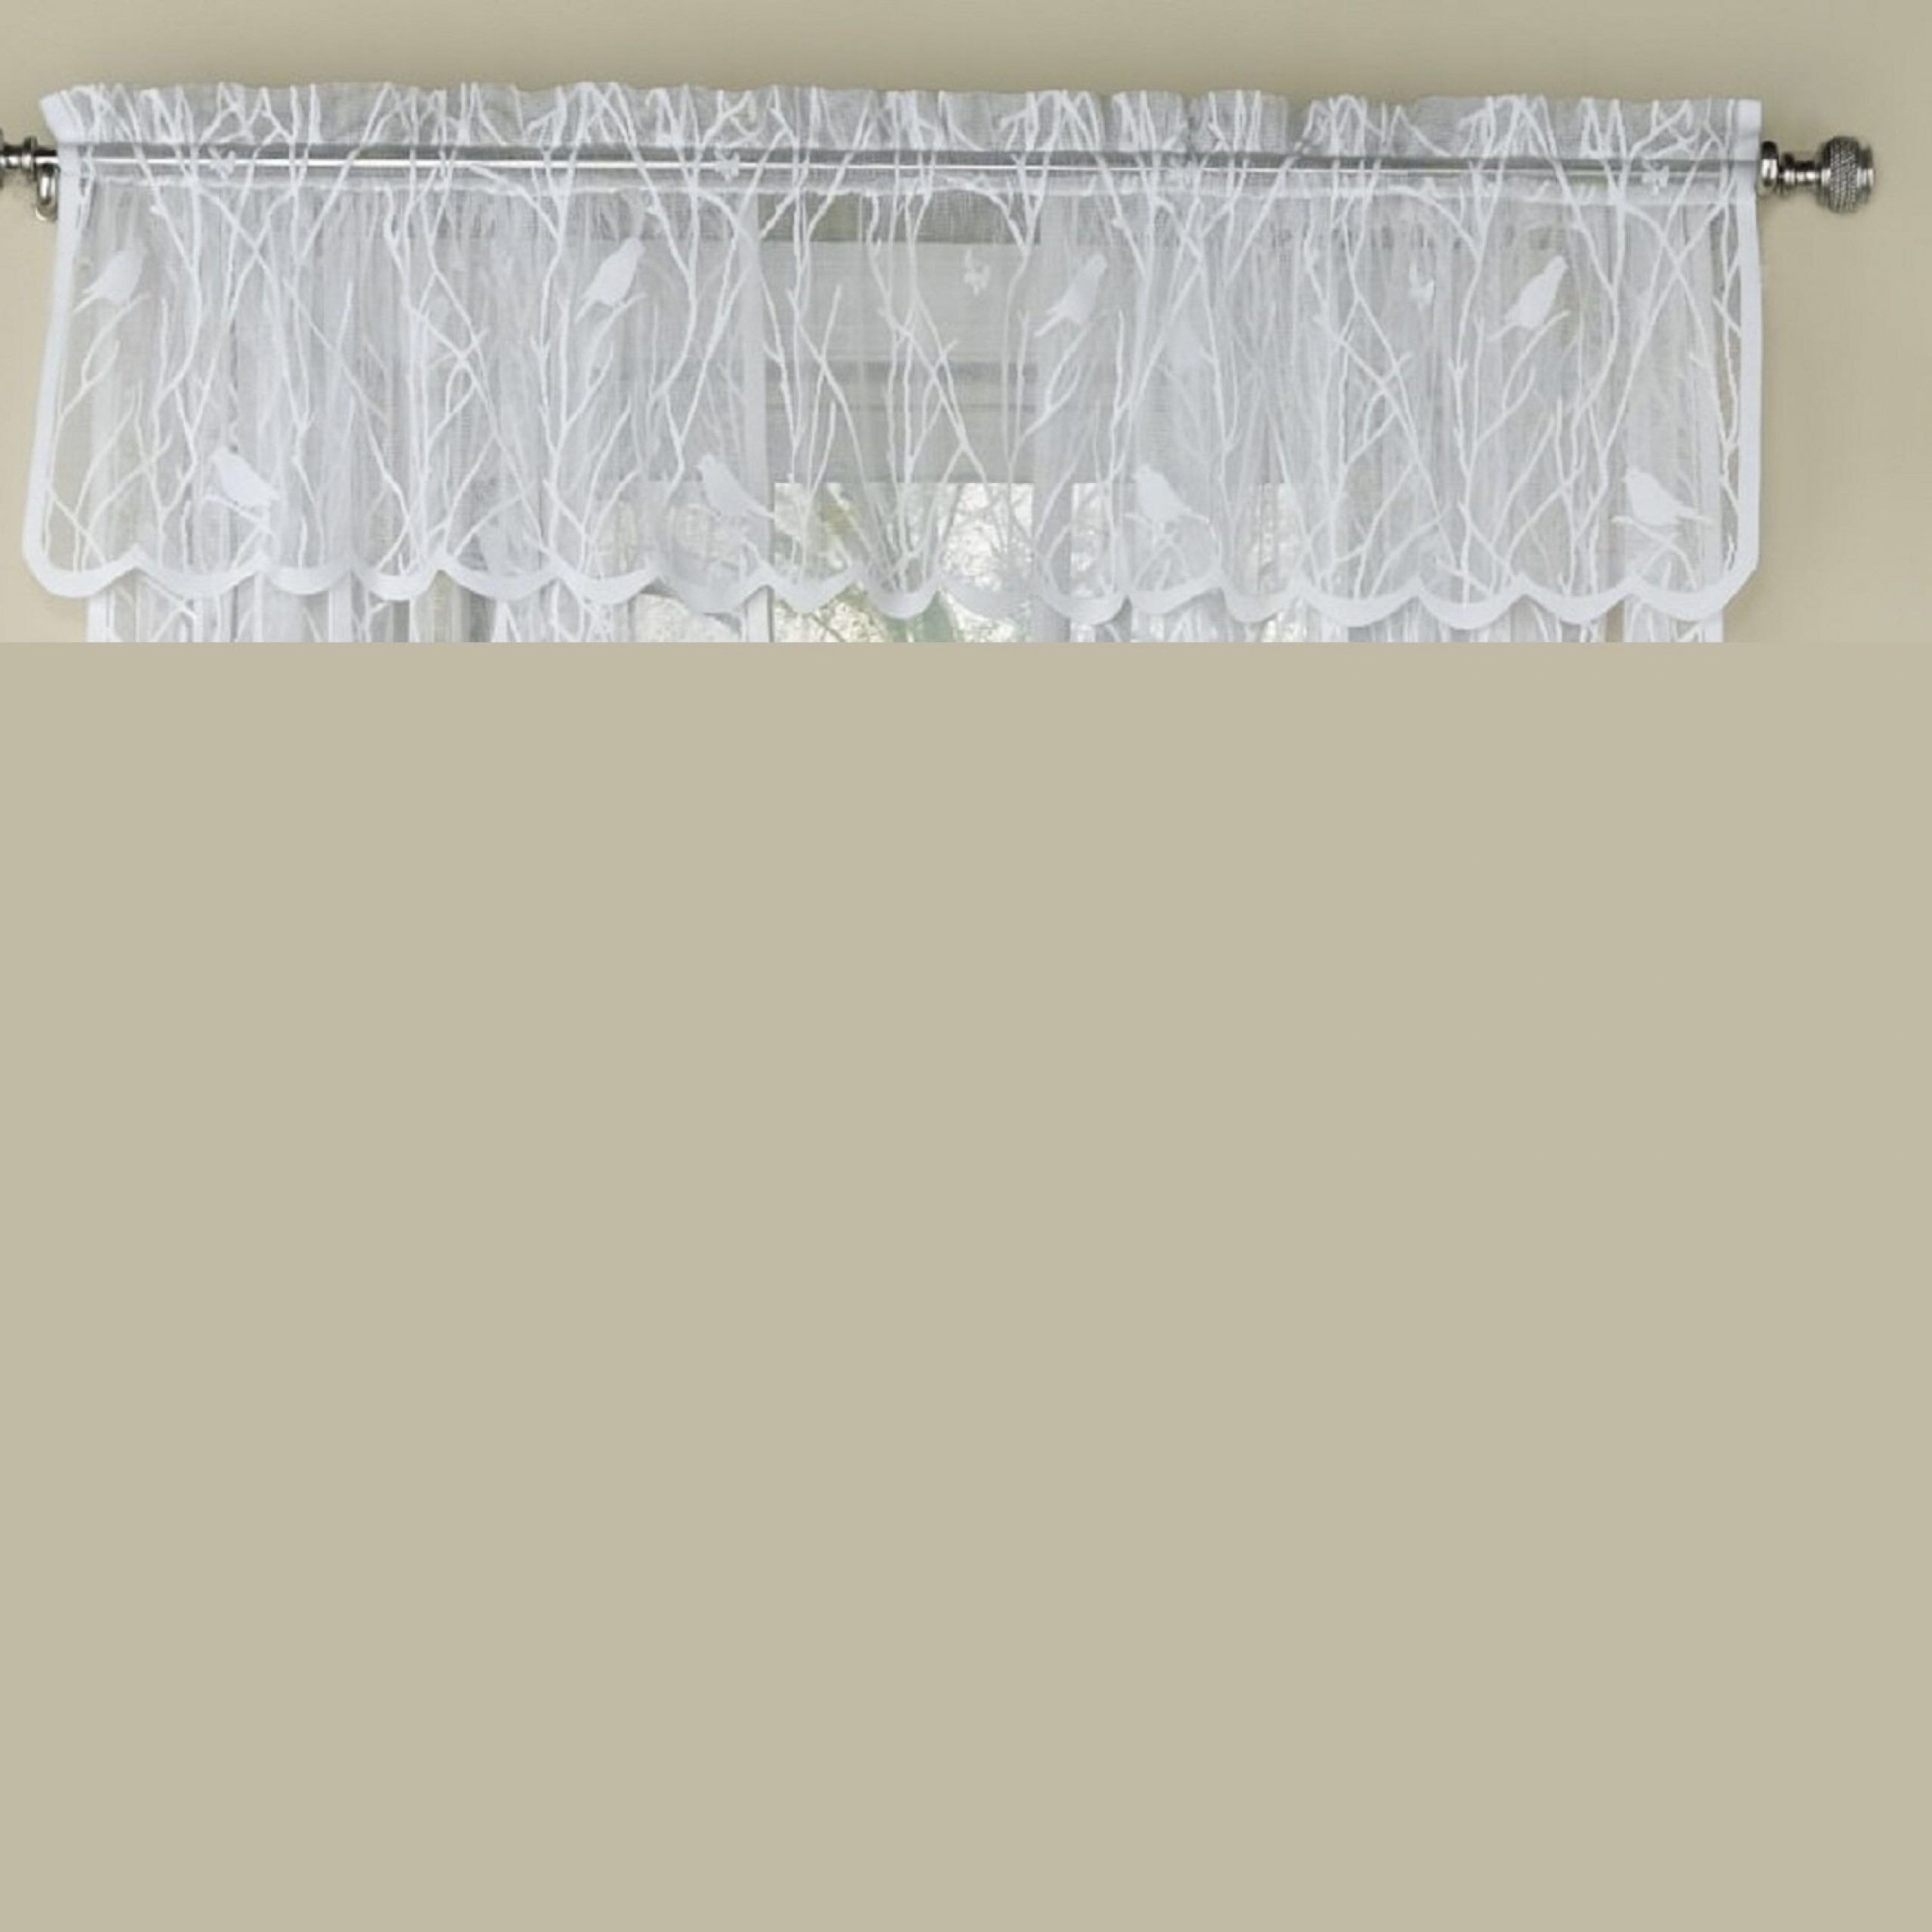 Prevatte Bird Song Sheer Lace Tailored 56" Window Valance Throughout White Knit Lace Bird Motif Window Curtain Tiers (Photo 15 of 20)